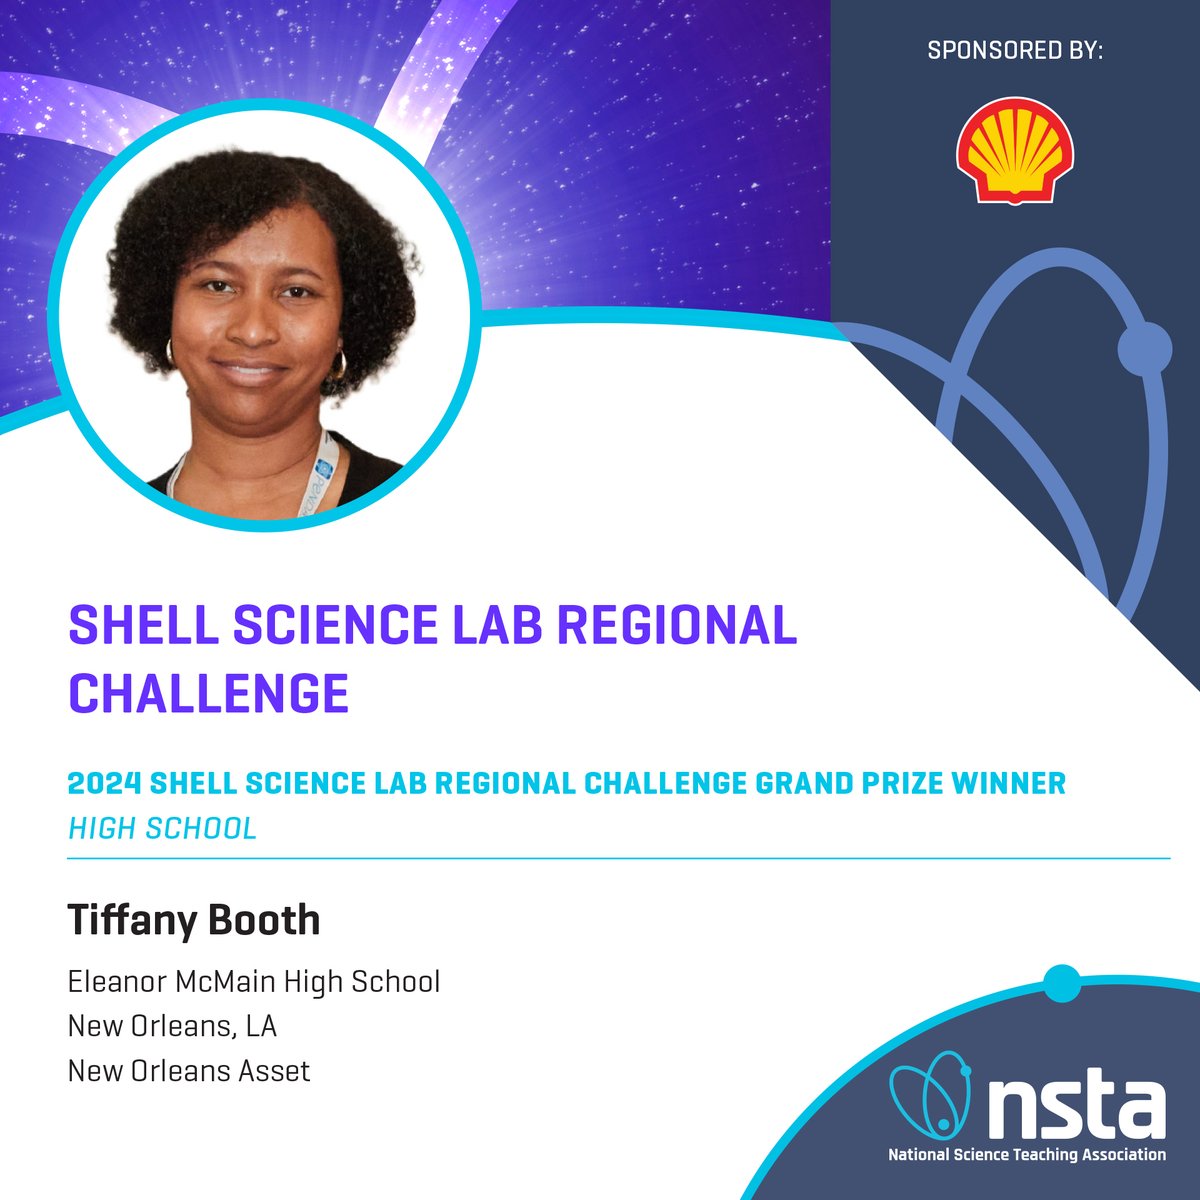 NSTA is honored to celebrate the 2024 Shell Science Lab Regional Challenge Grand Prize Winners! This award recognizes exceptional science educators for their exemplary approaches to science lab instruction utilizing limited school and laboratory resources. Congrats to all! 🎉🥳